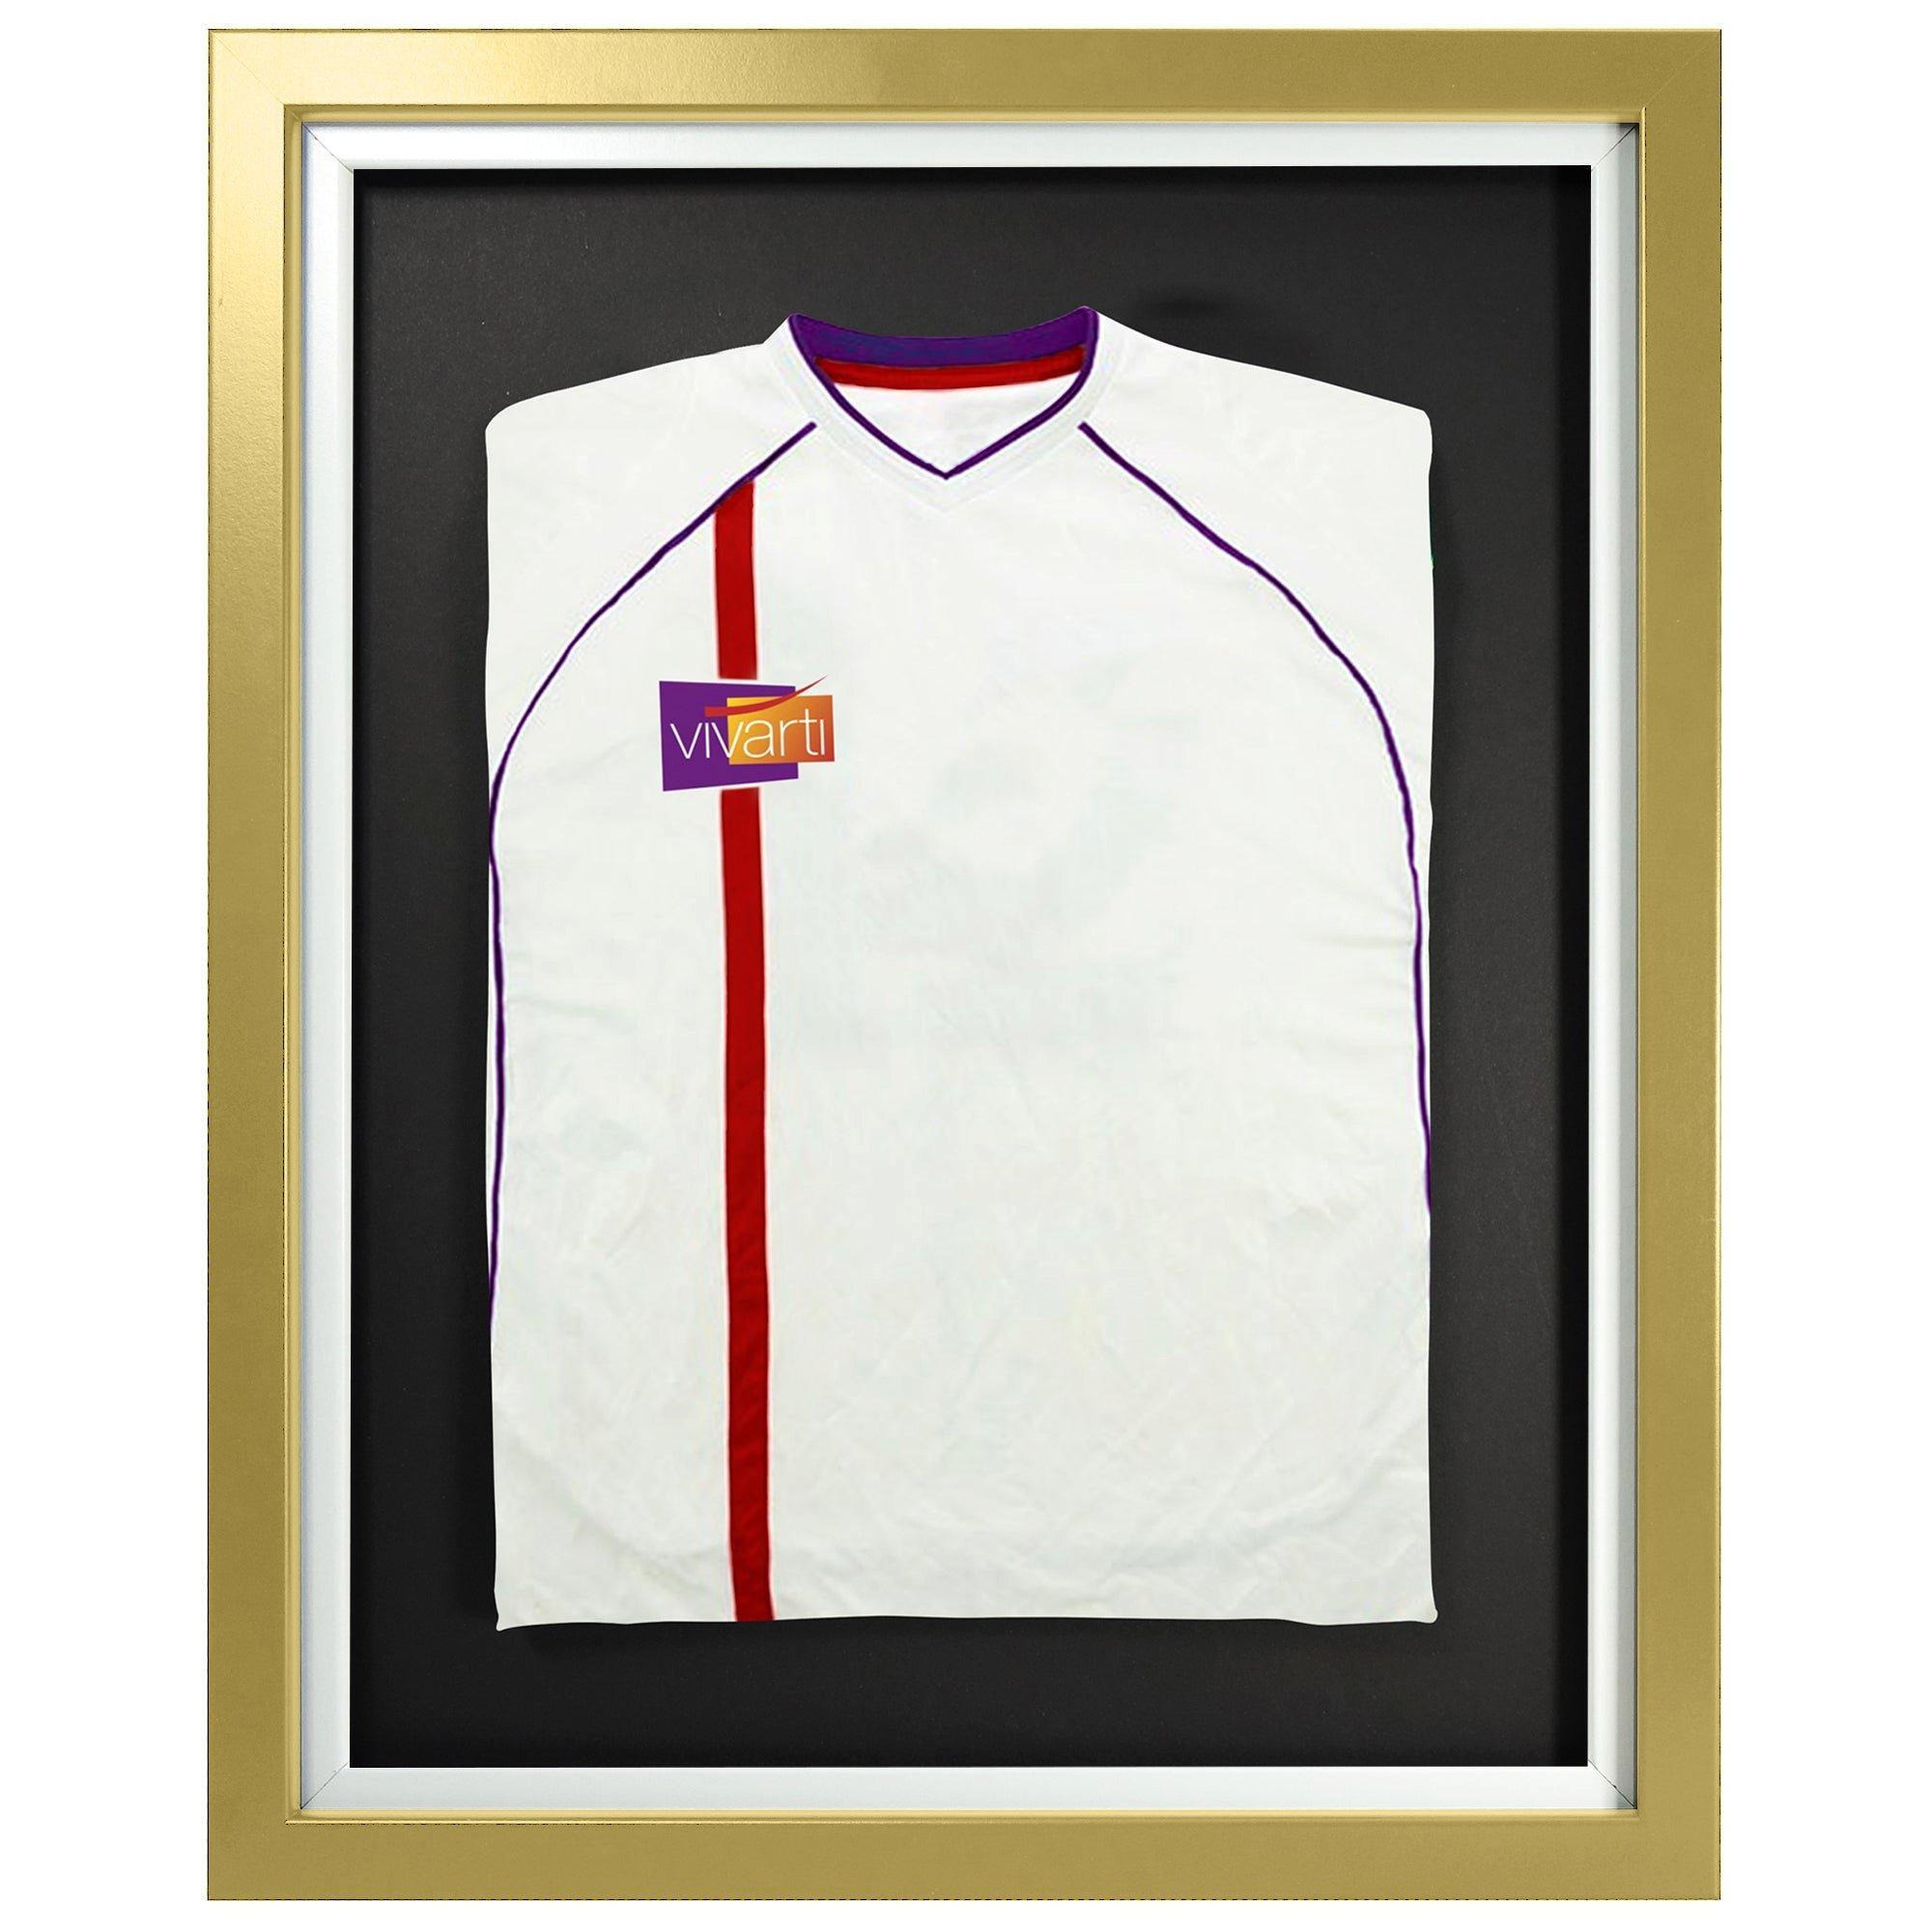 Standard Mounted Sports Shirt Display Frame with Gold  Frame and White Inner Frame 40 x 50cm - image 1